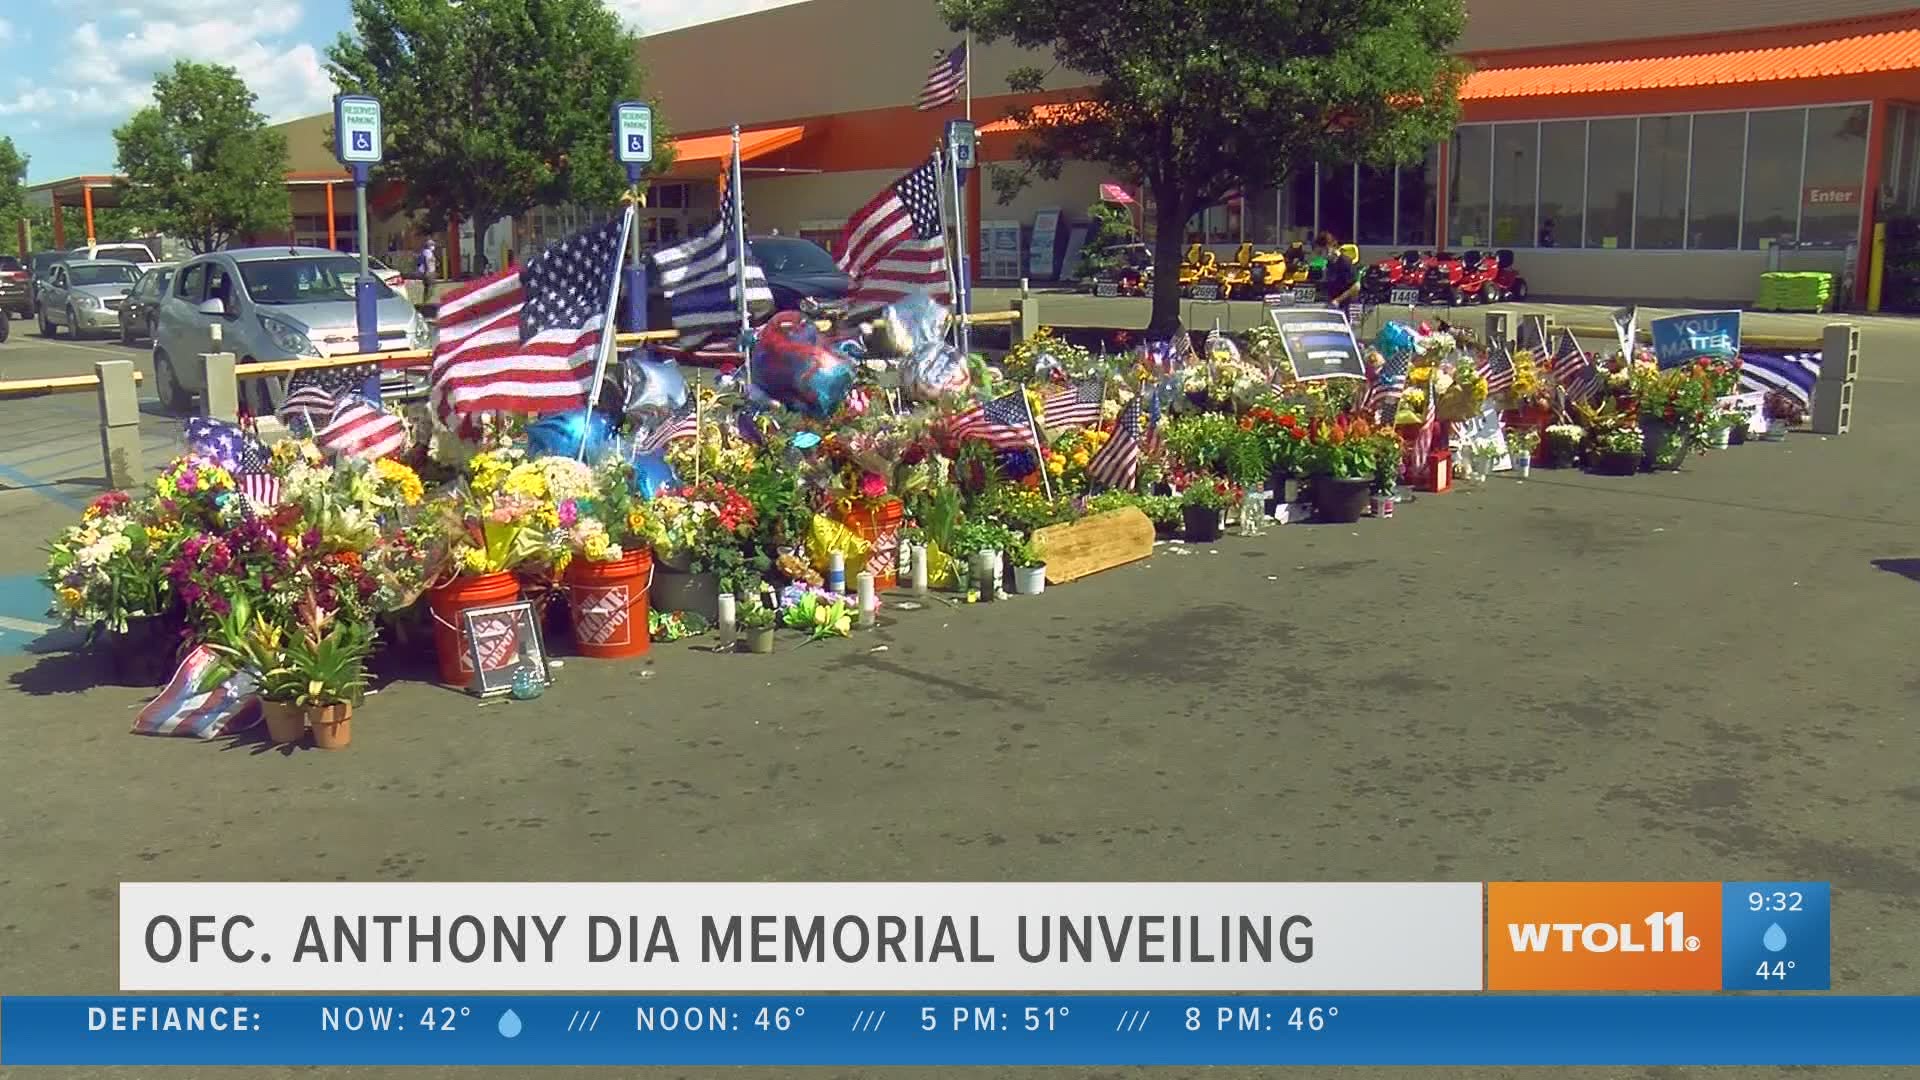 A permanent memorial for Officer Anthony Dia is being unveiled in the parking lot of the Home Depot where he was killed on July 4.